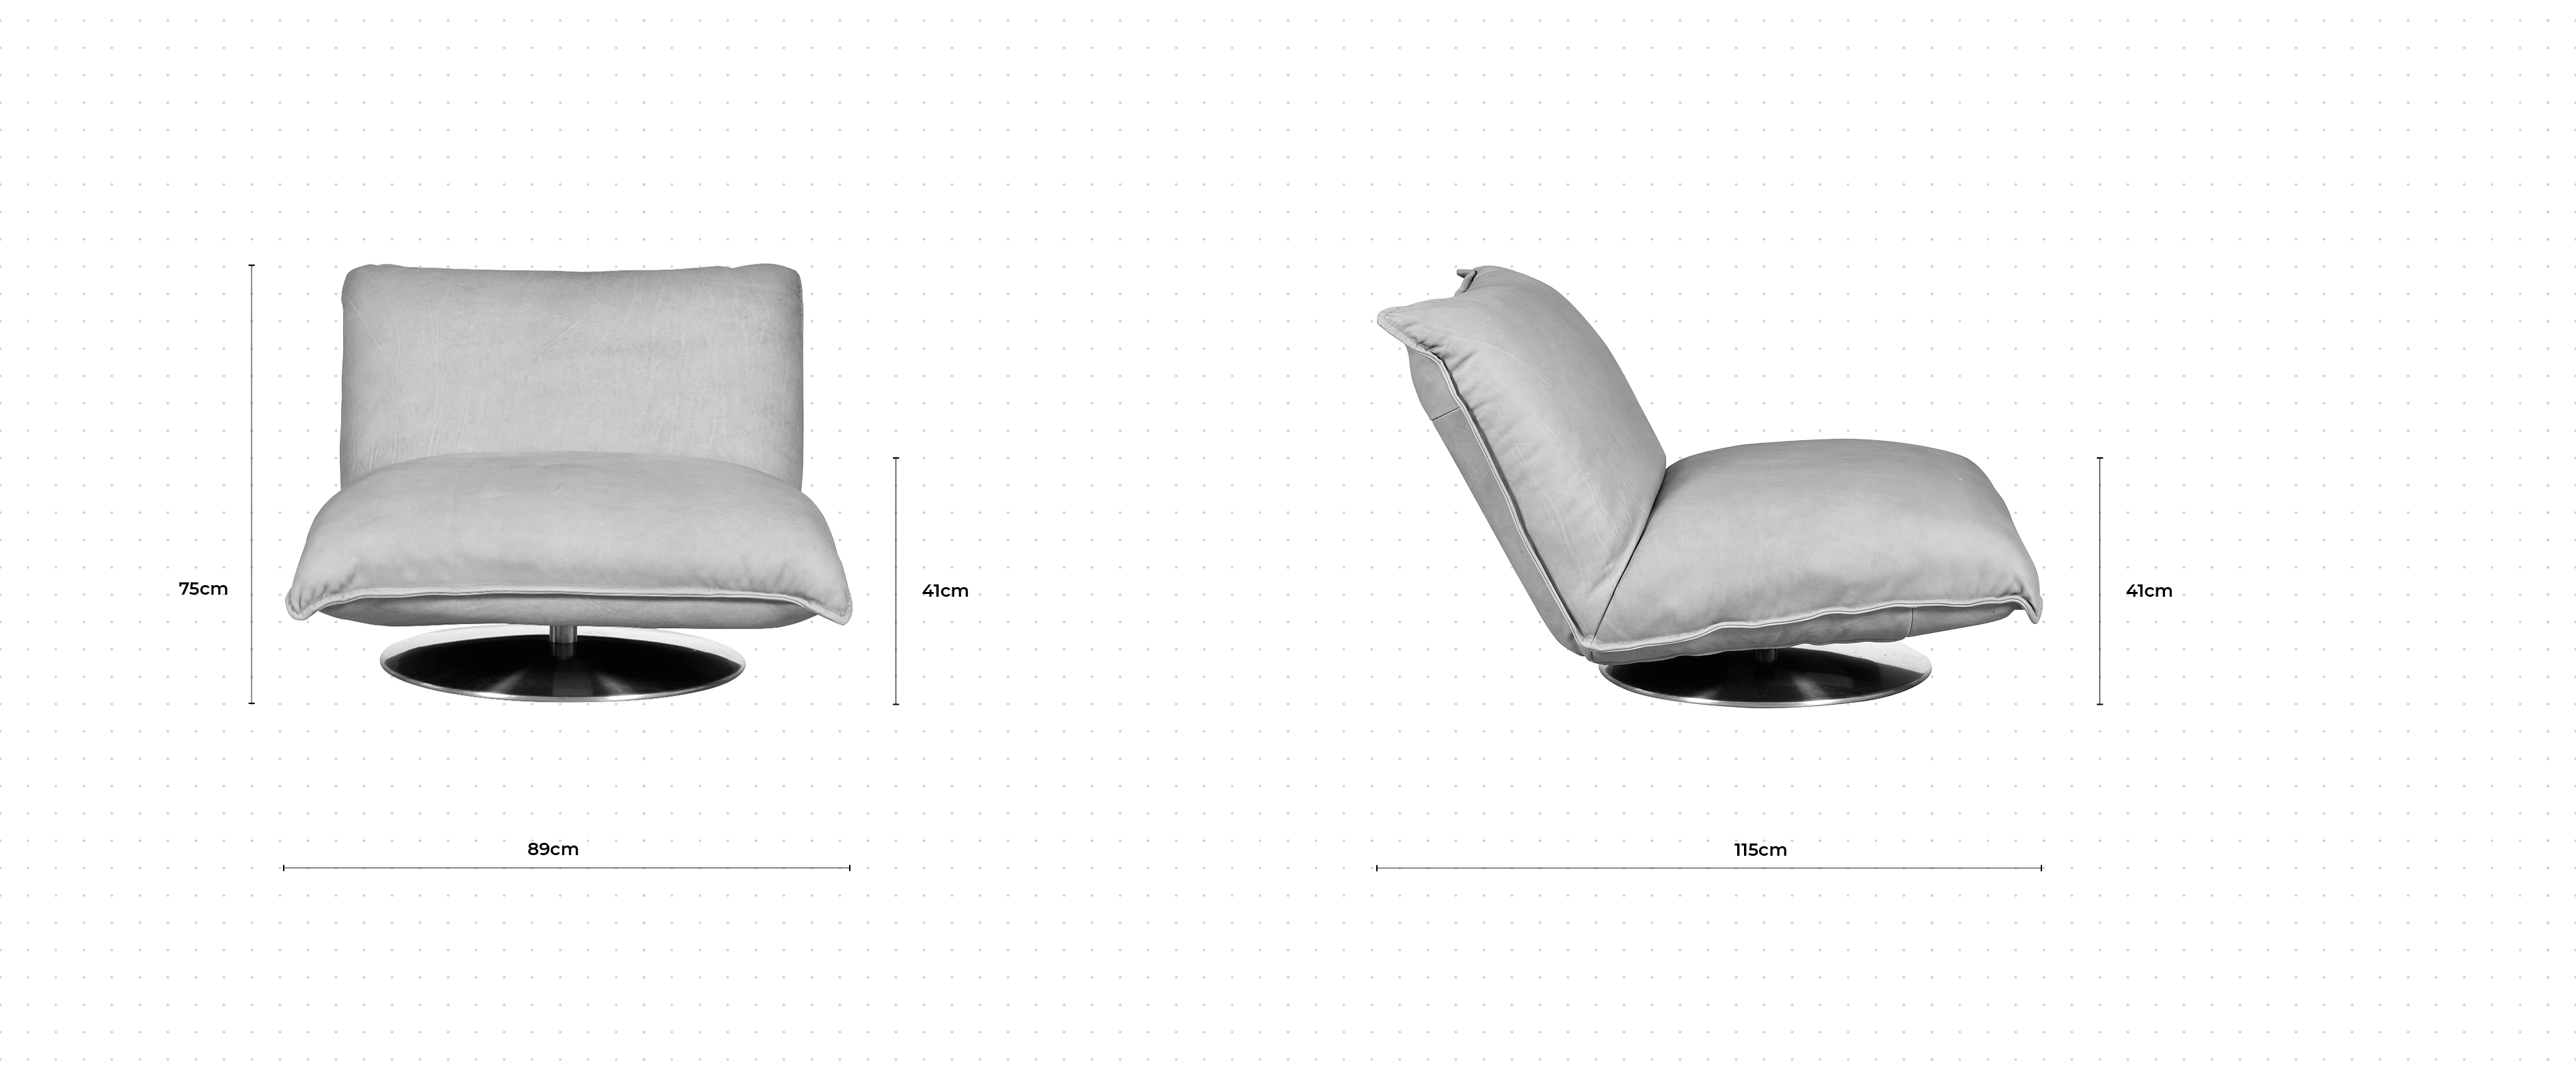 Anderson Swivel Chair dimensions